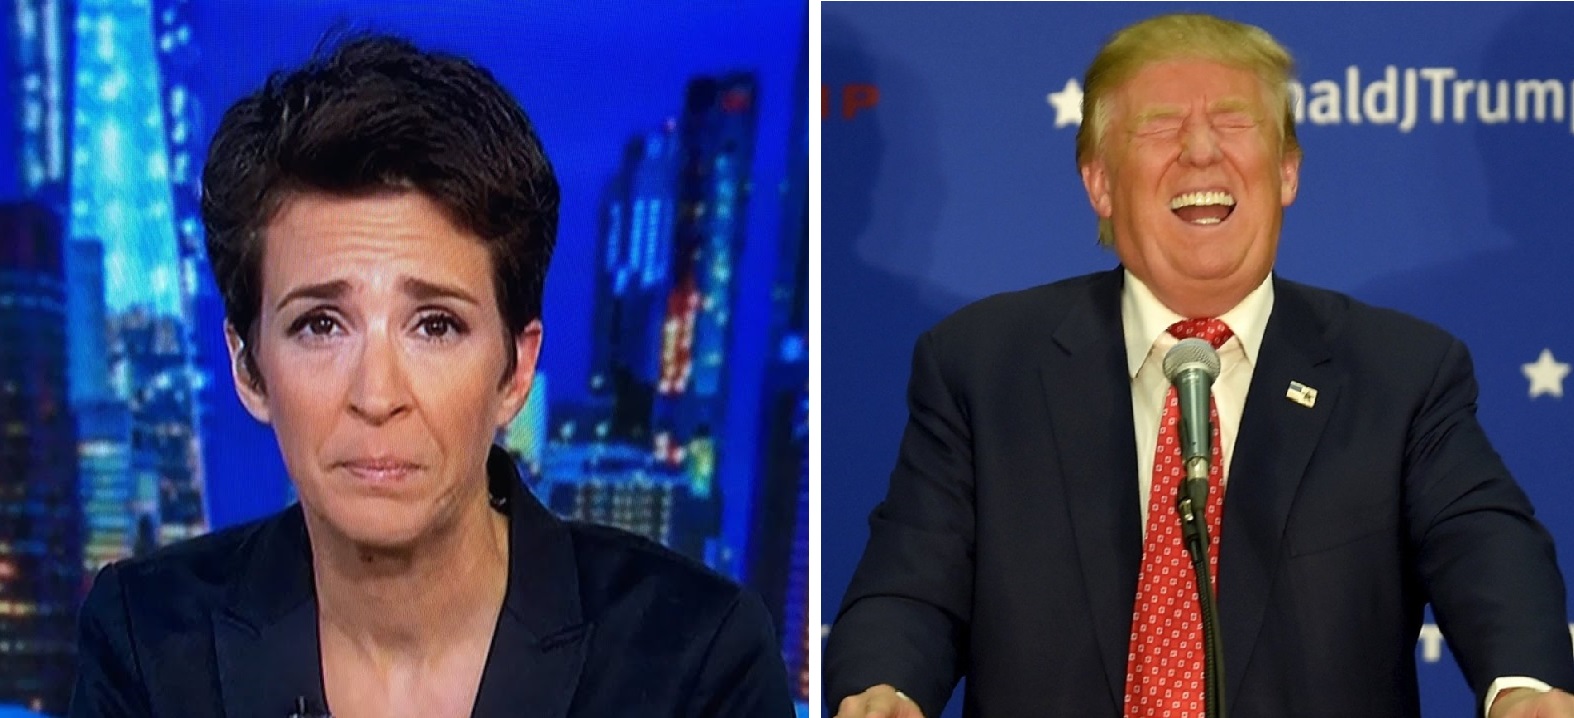 Twitter Suspends Account Showing Rachel Maddow Crying